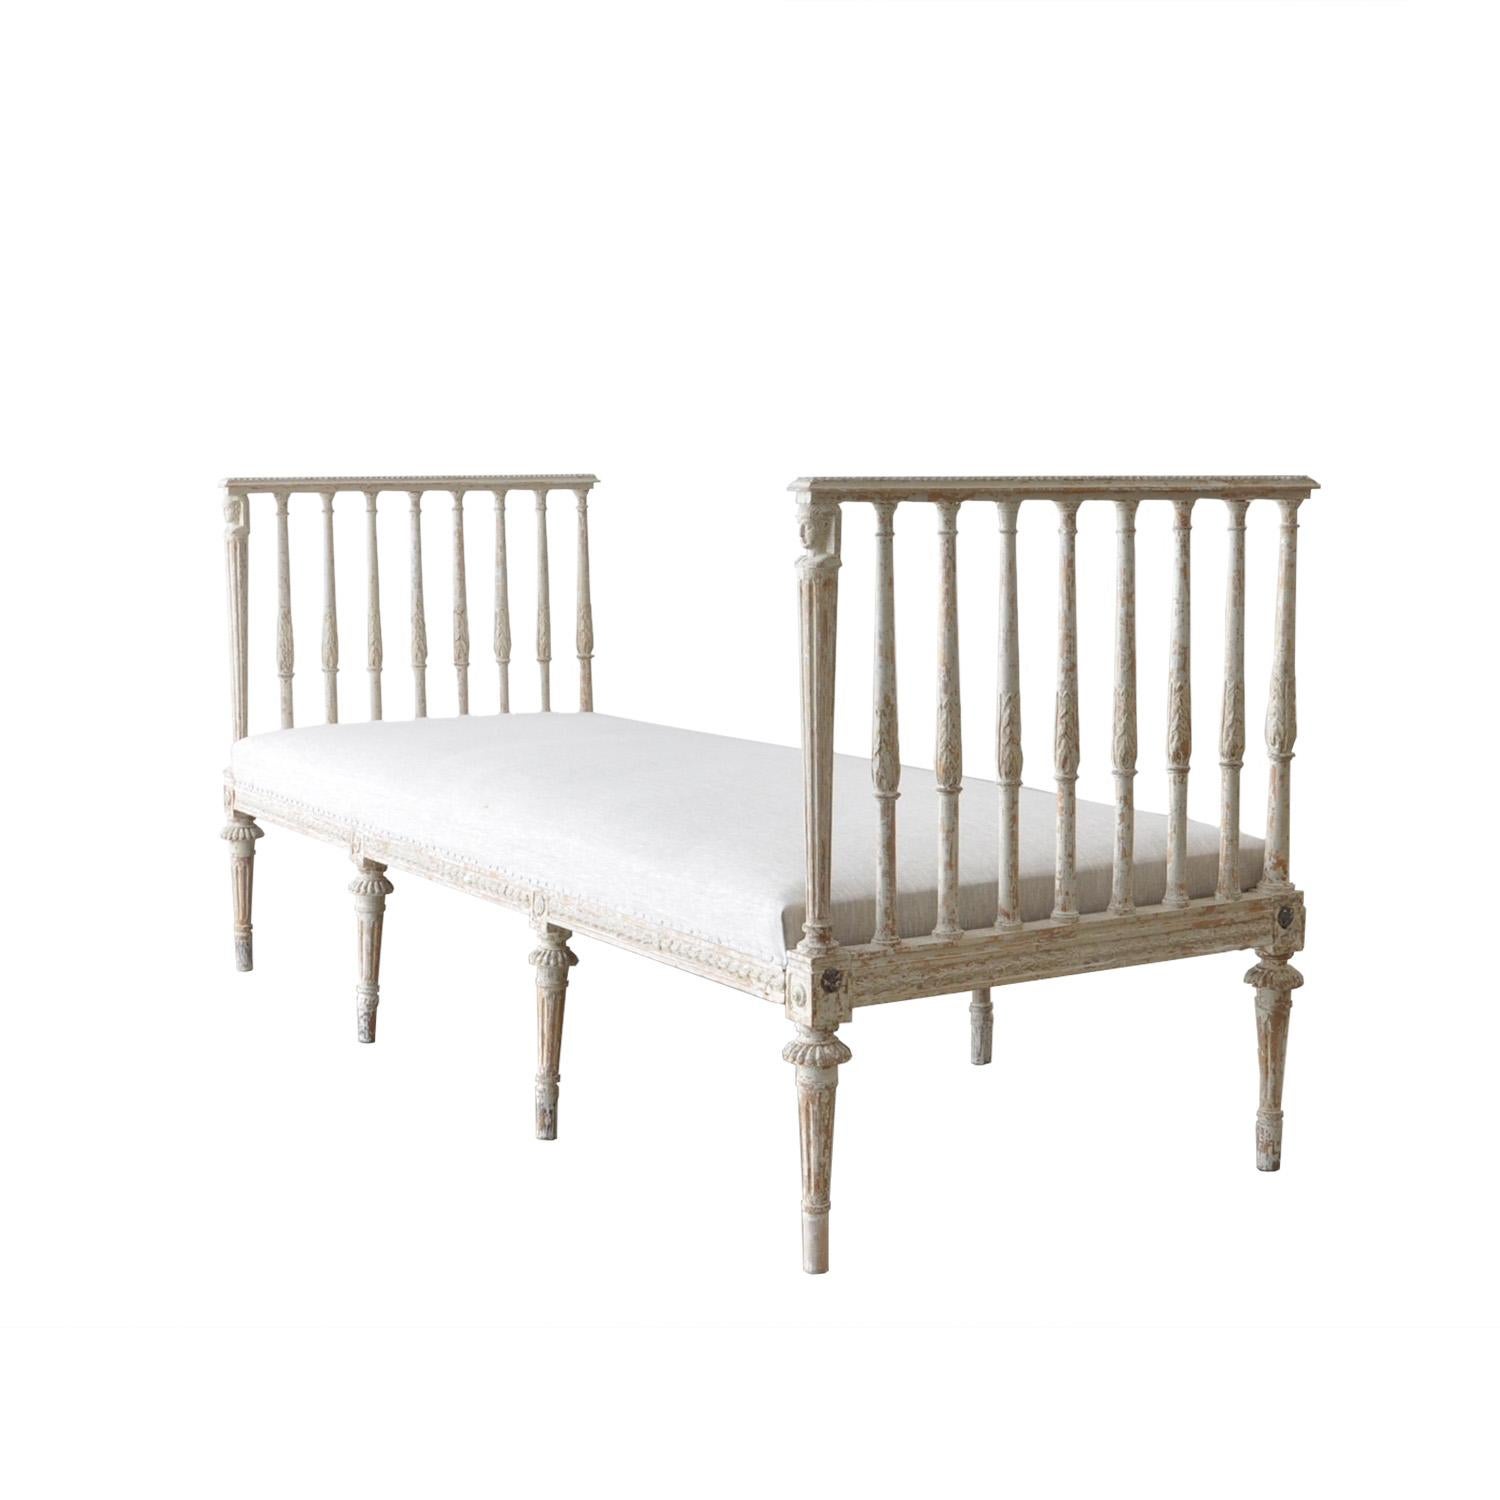 A period 18th century Gustavian day bed with carved wood and plaster decoration, scraped to original pale paint and new upholstery in linen. Circa 1780